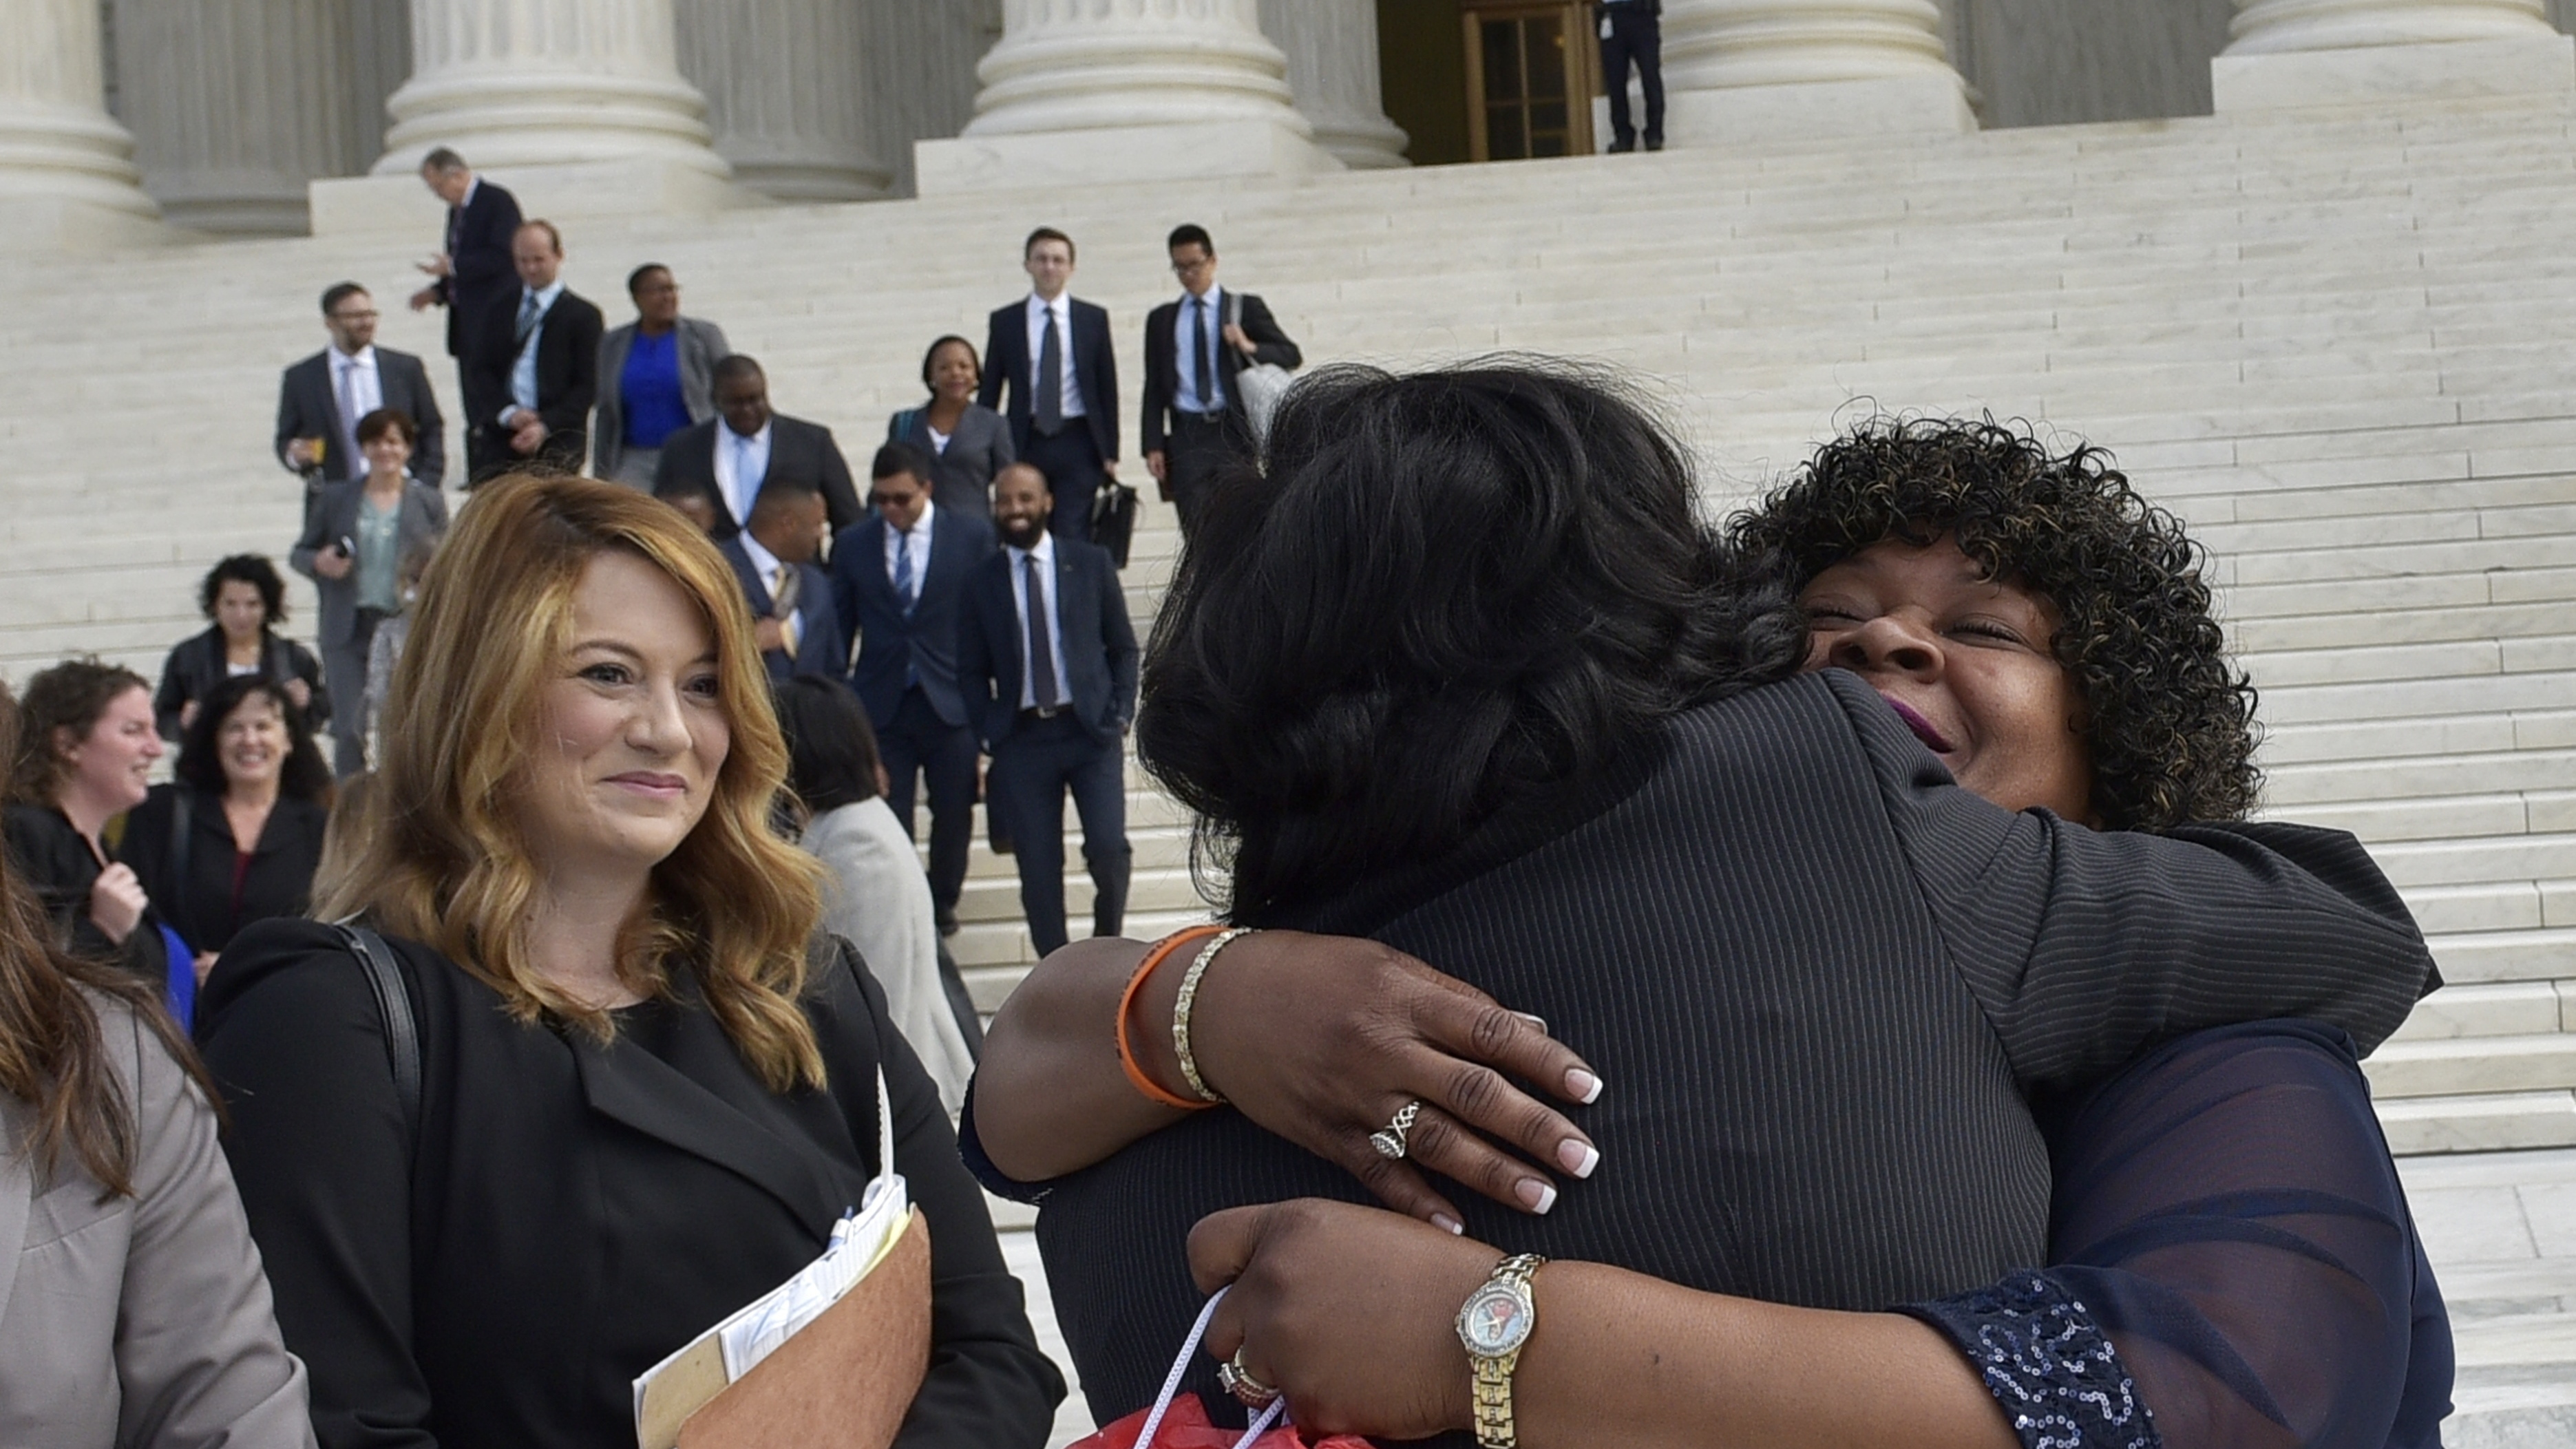 Christina Swarns, center, the lead counsel for Duane Buck, is embraced by Buck's stepsister Phyllis Taylor, right, outside of the U.S. Supreme Court on Oct. 5 in Washington, D.C. (Photo by Mandel Ngan/AFP/Getty Images)